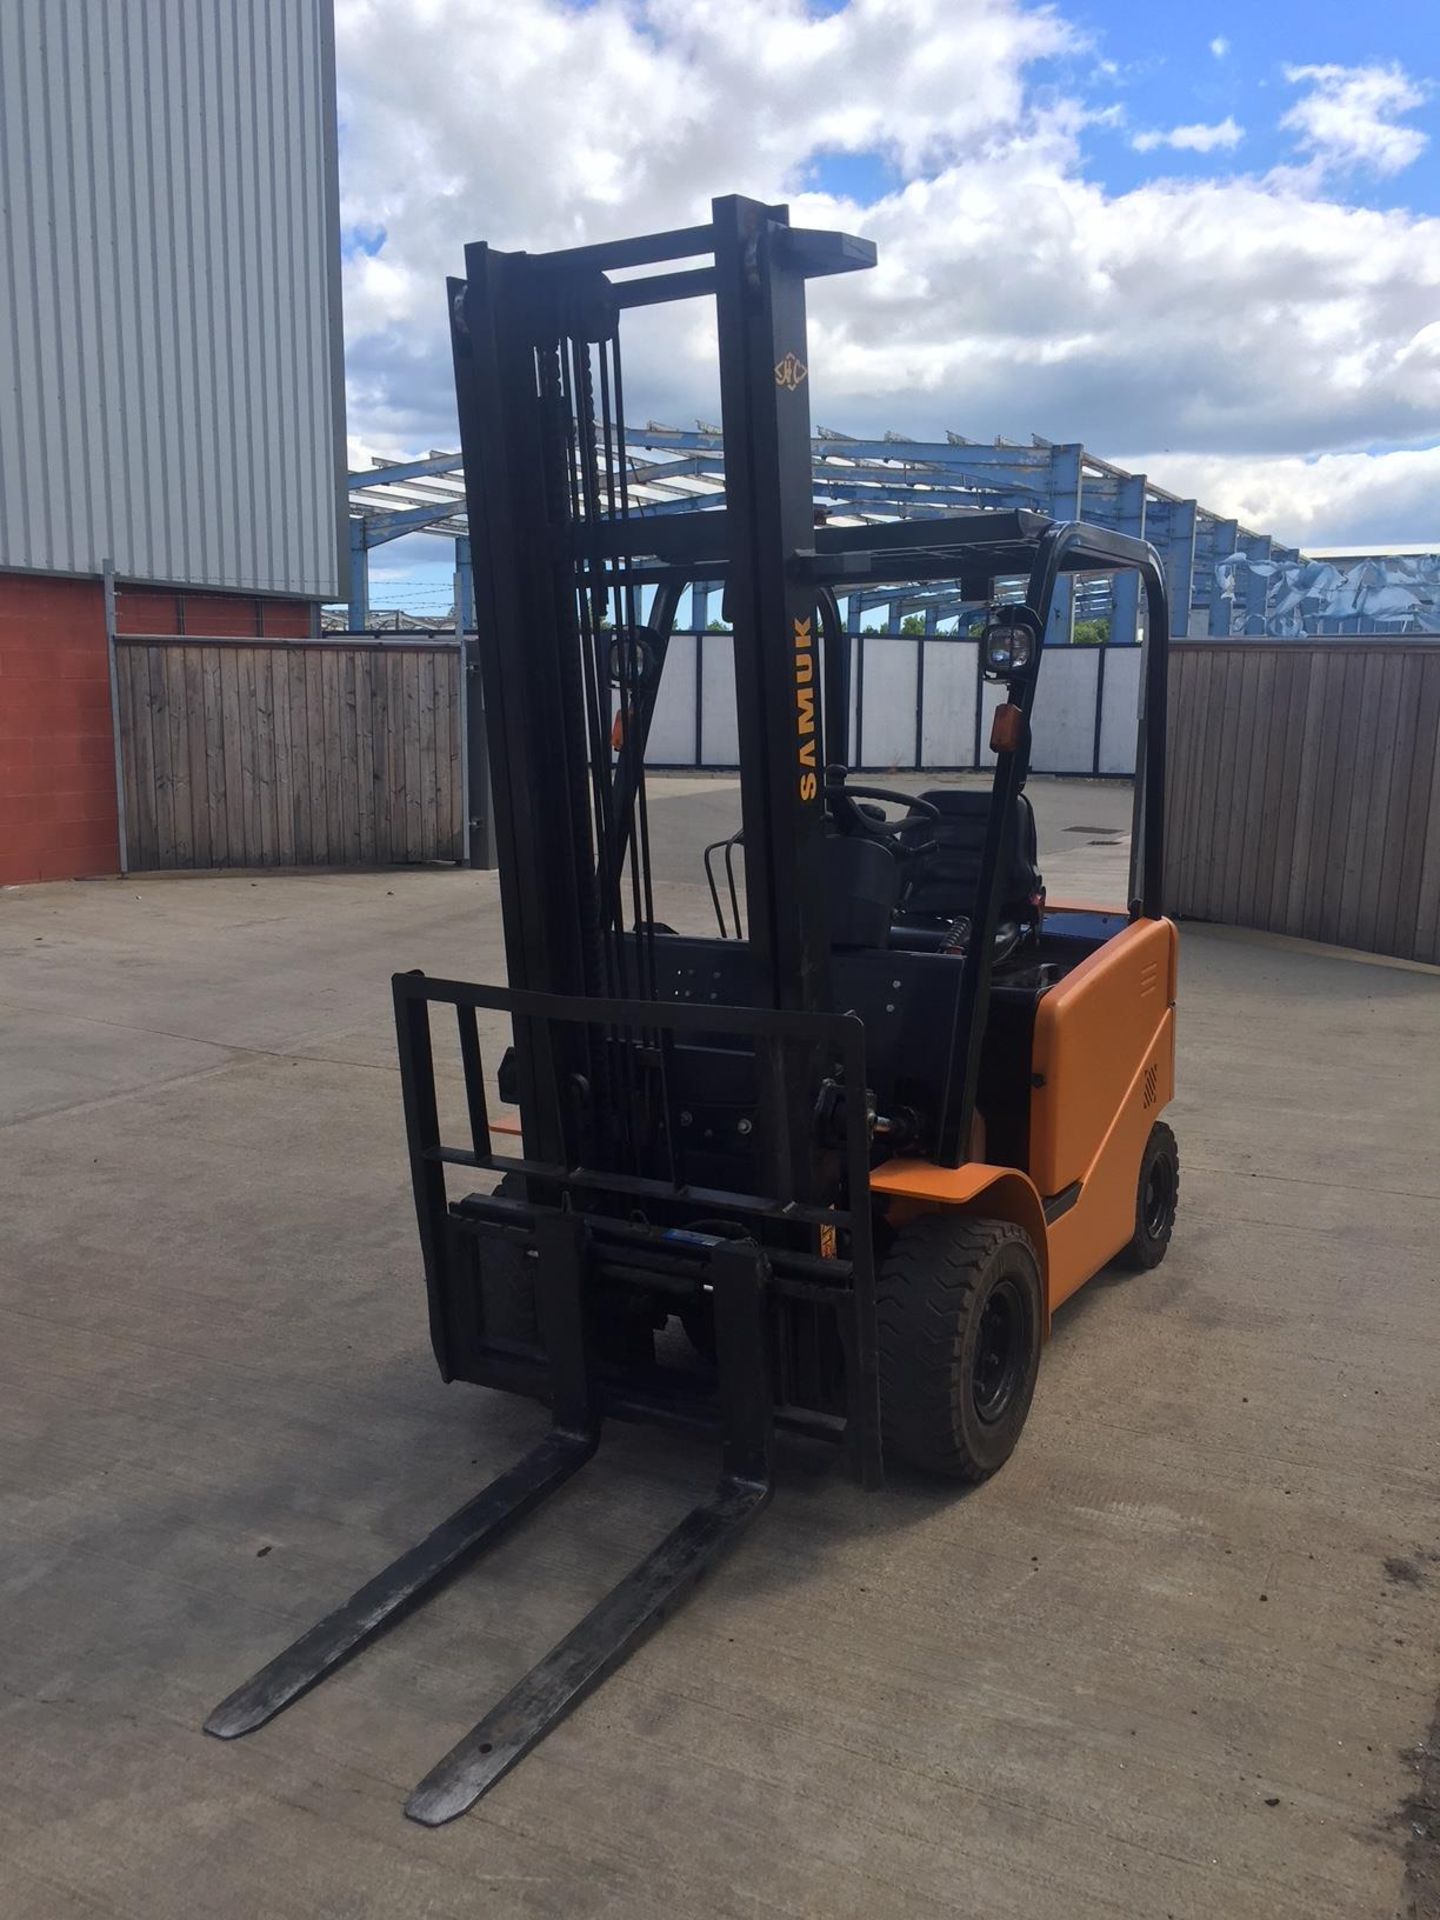 Sam-uk electric counterbalance fork lift truck - Fully refurbished and painted. - Image 5 of 9